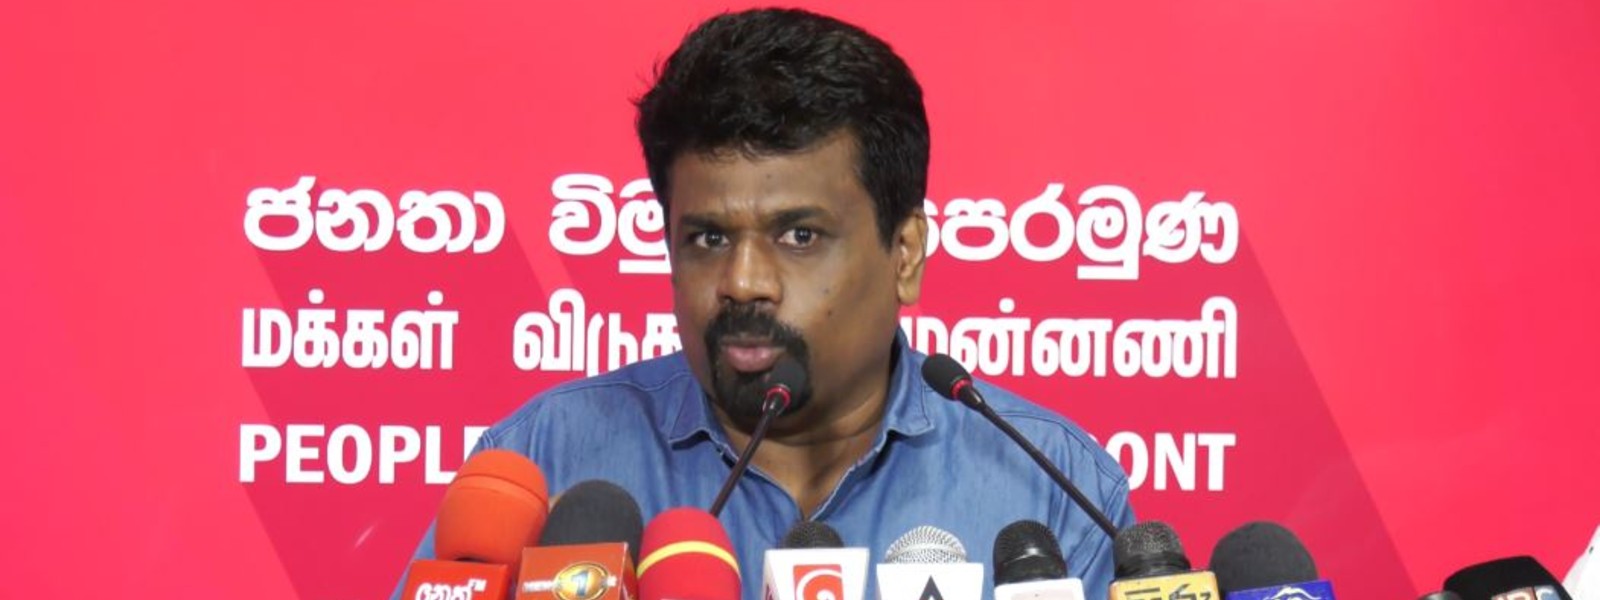 April 21st attacks: JVP complains against removal of posters